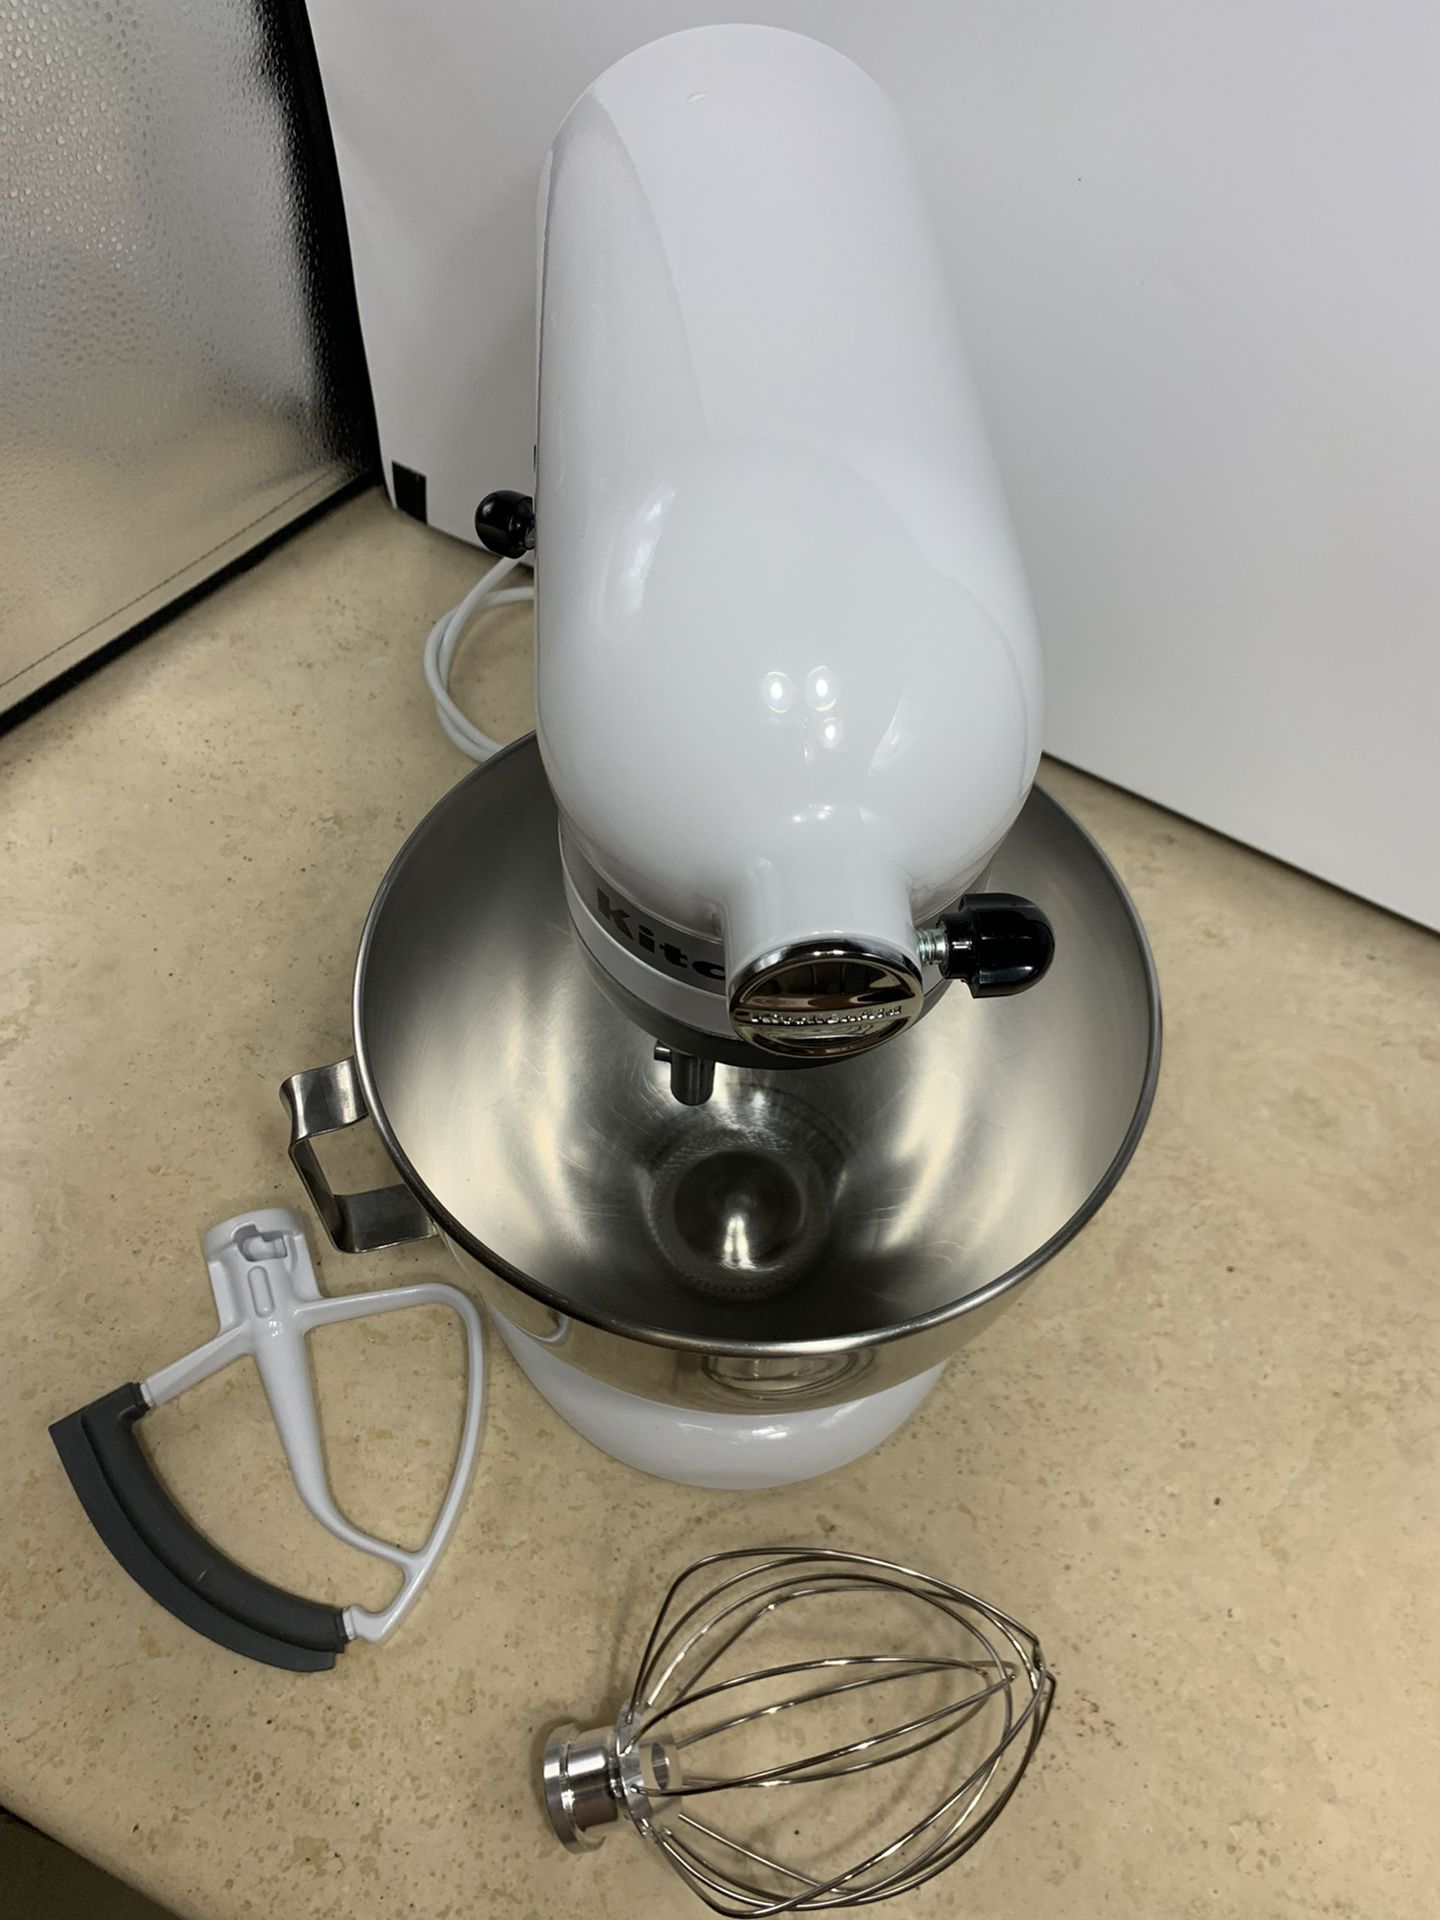 Mixer Kitchen Aid Professional 5 Plus With Accessories for Sale in Boca  Raton, FL - OfferUp